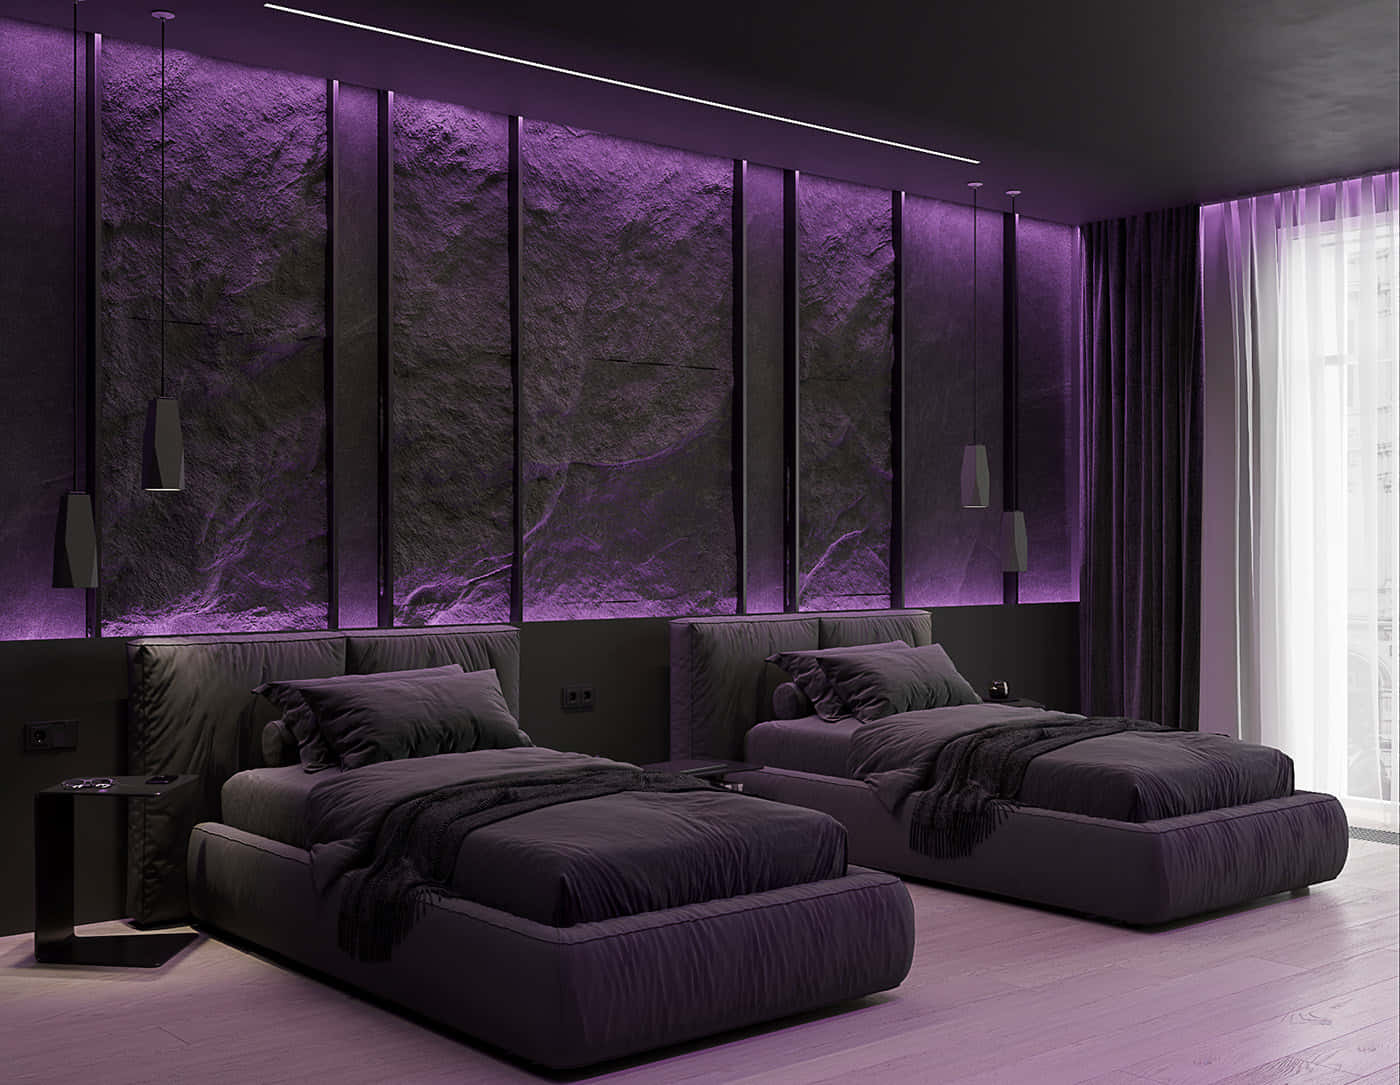 Add a splash of vibrant purple décor to transform any space Wallpaper